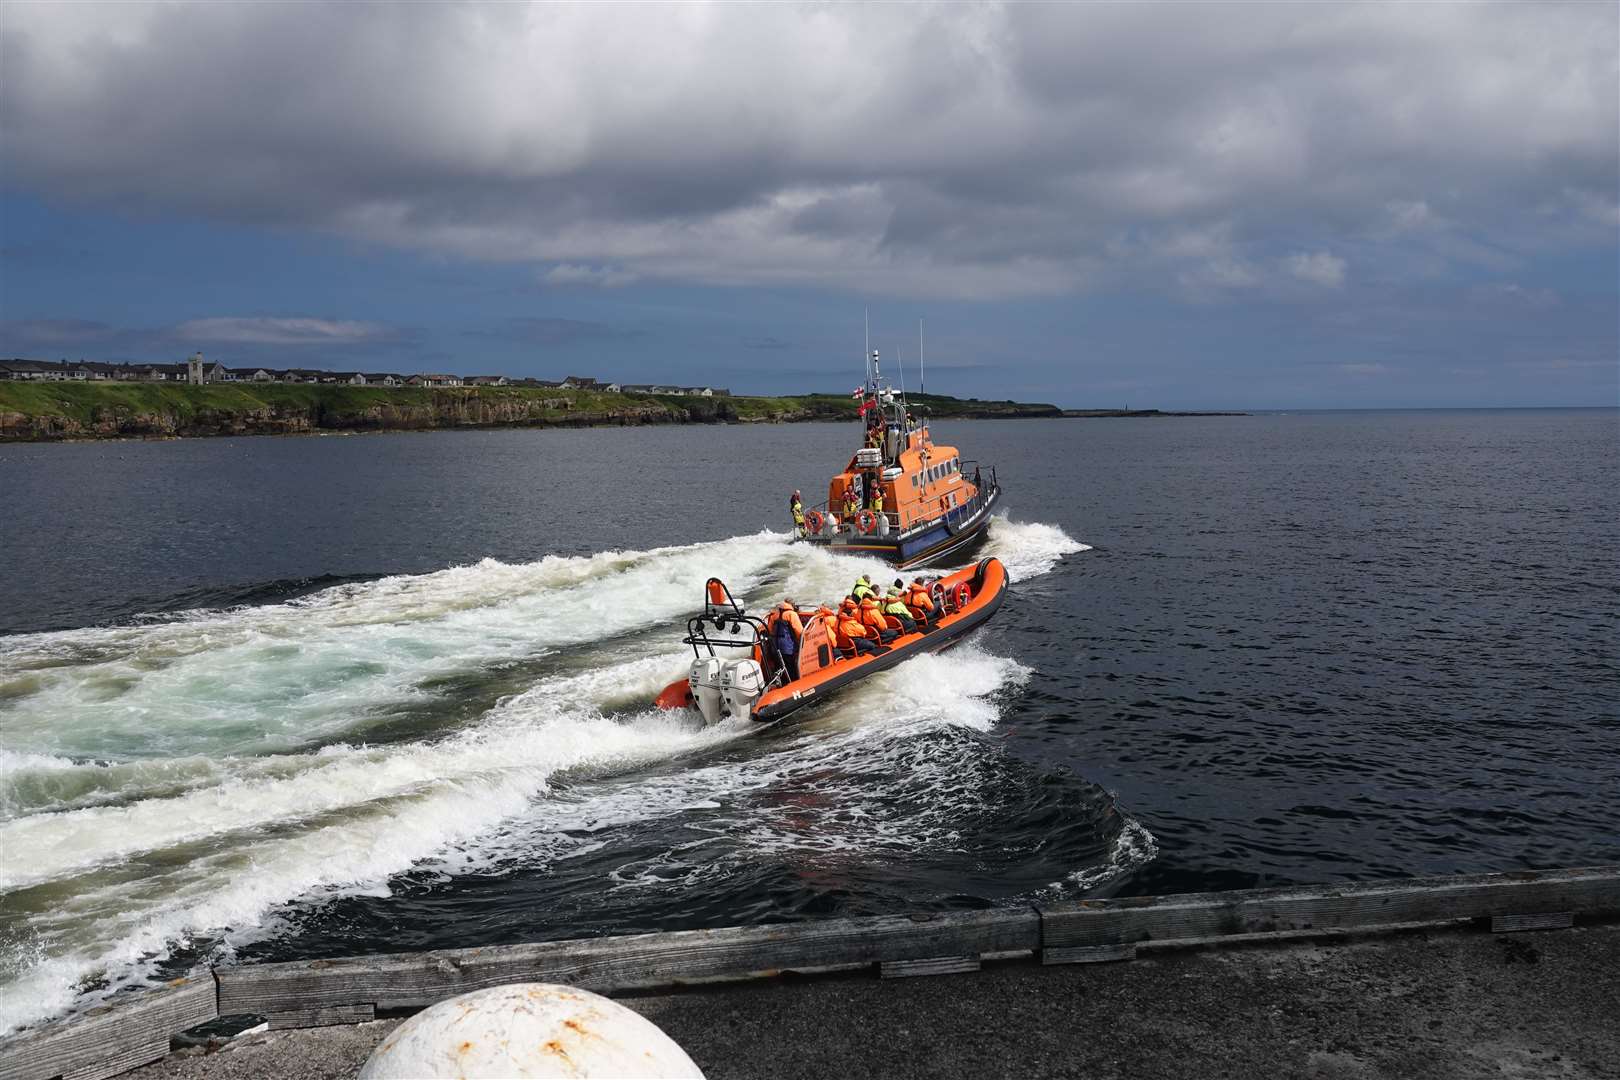 Derek Bremner sent this image of the Wick lifeboat Roy Barker II and Caithness Seacoast's Geo Explorer leaving Wick harbour recently.